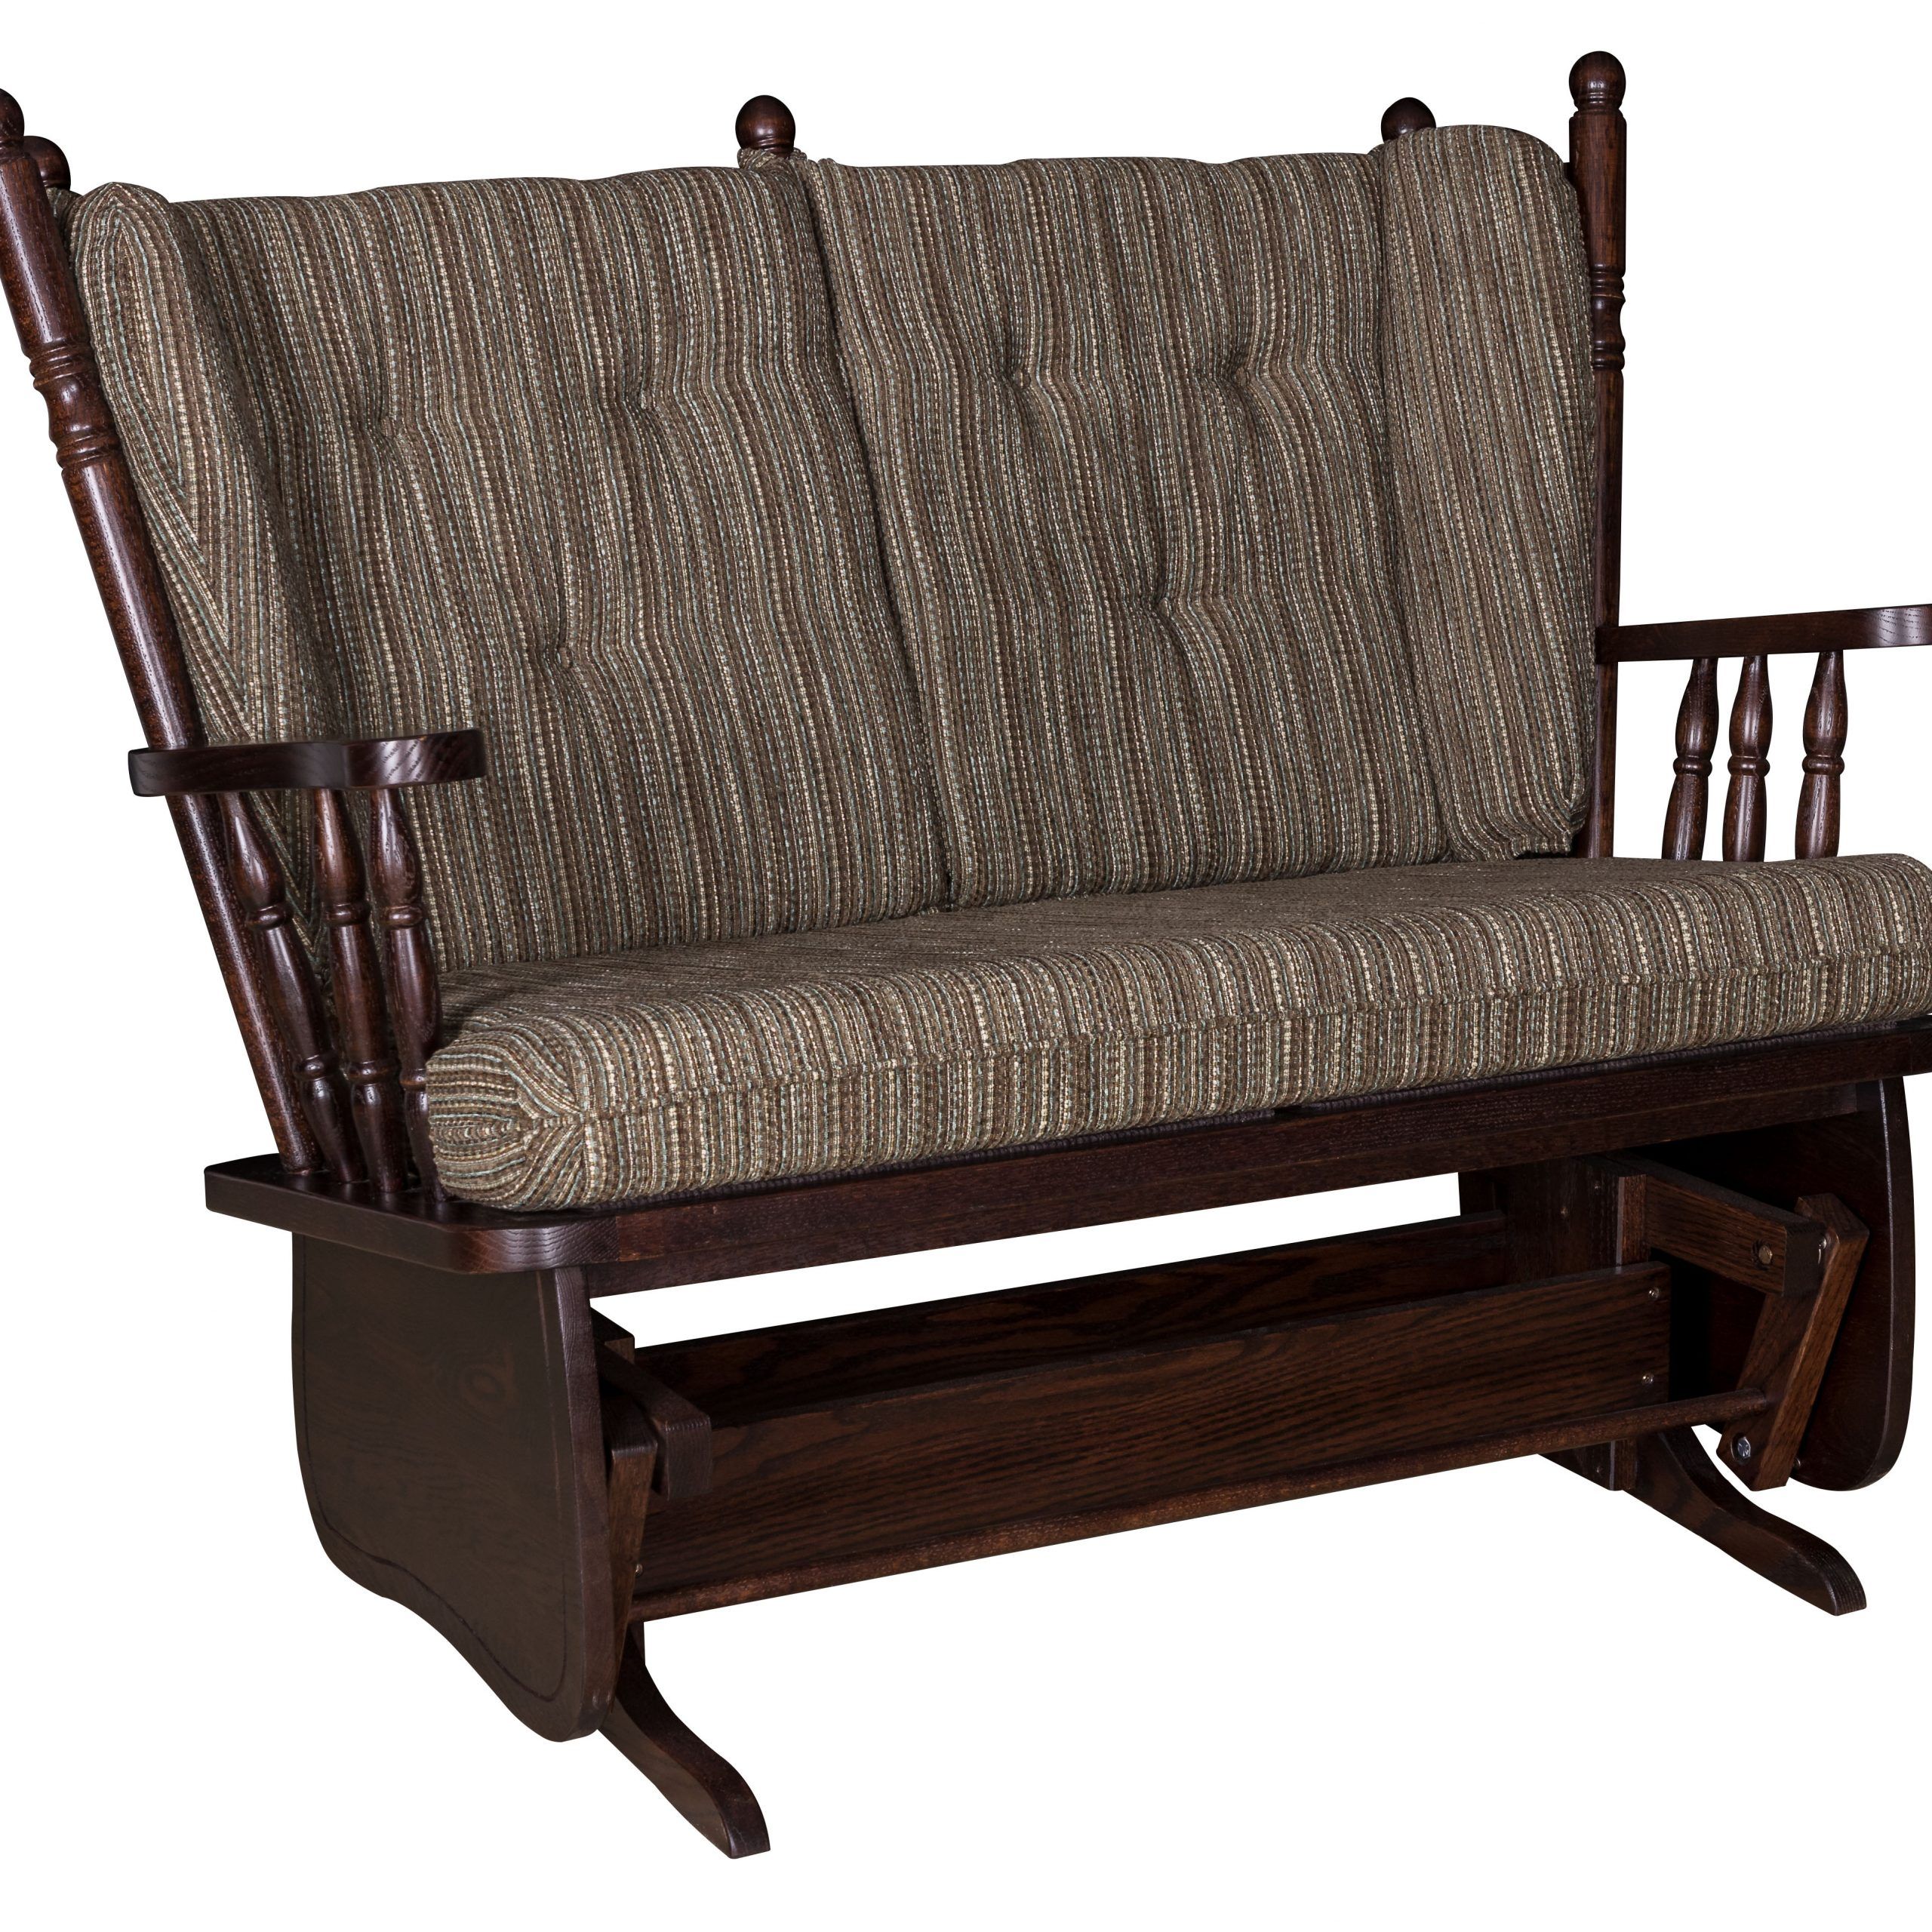 4 Post Low Back Loveseat Glider | 4 Post Loveseat Wood Glider Throughout Low Back Glider Benches (View 6 of 25)